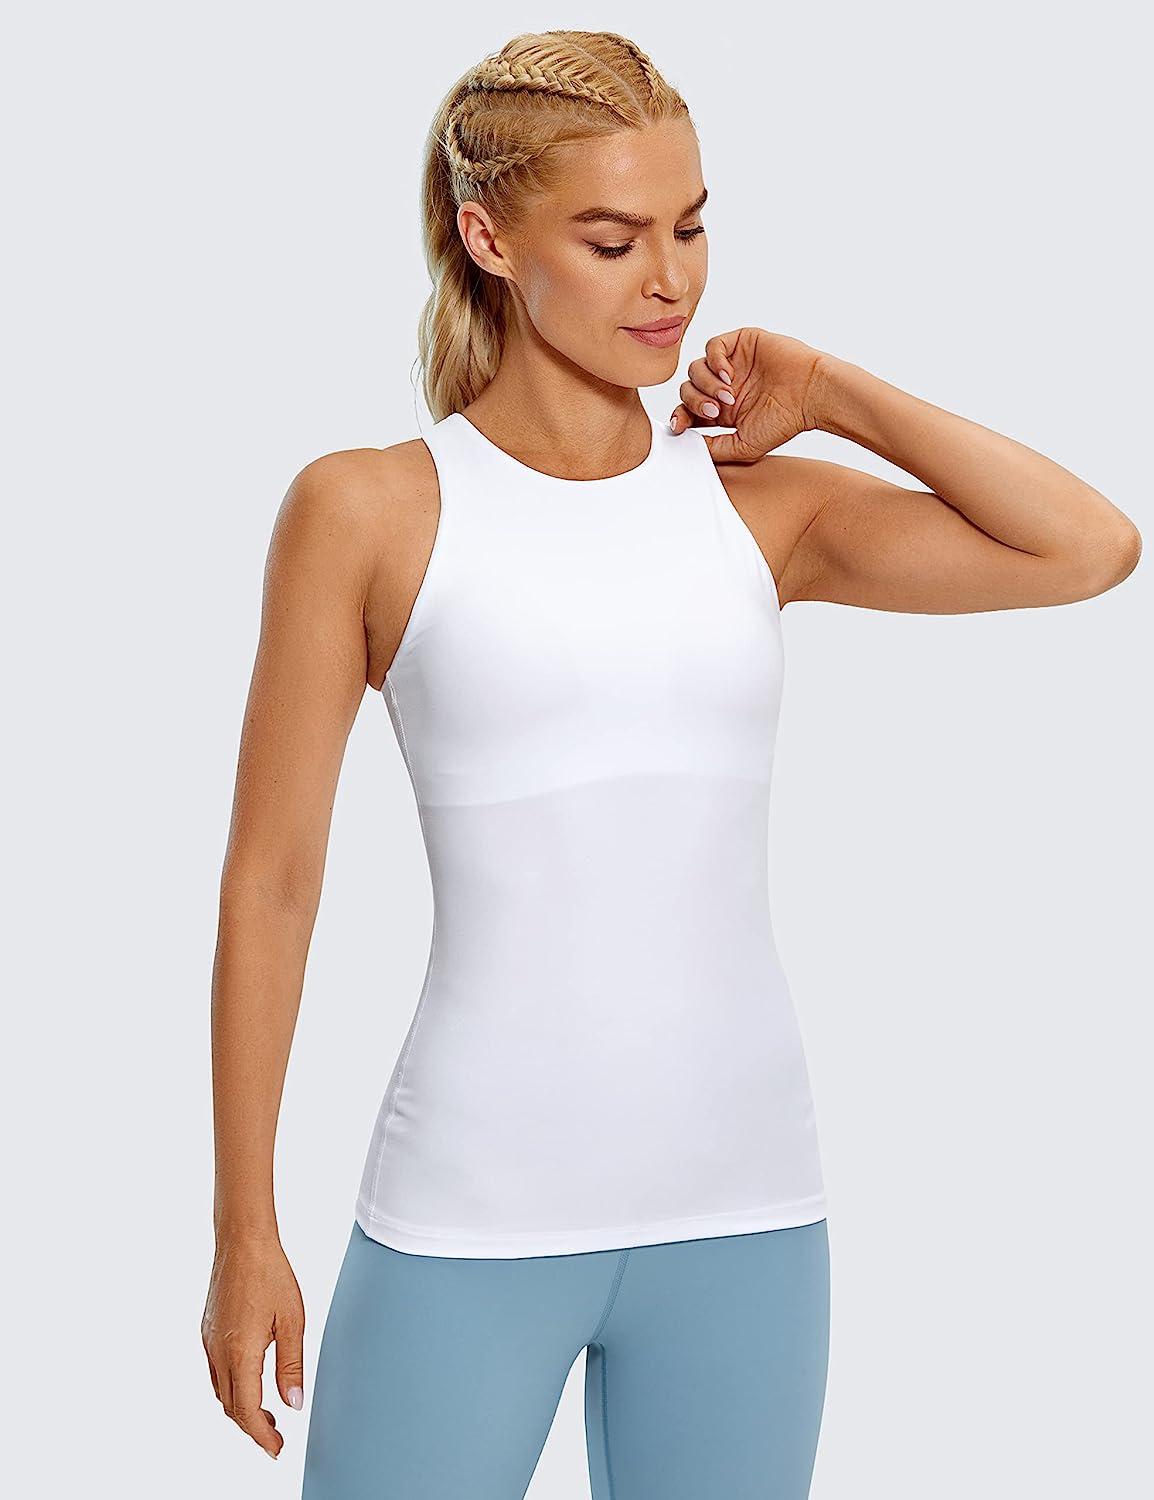 CRZ YOGA Womens High Neck Workout Tank Tops - with Built-in Shelf Bra  Racerback Athletic Sports Shirts White Large